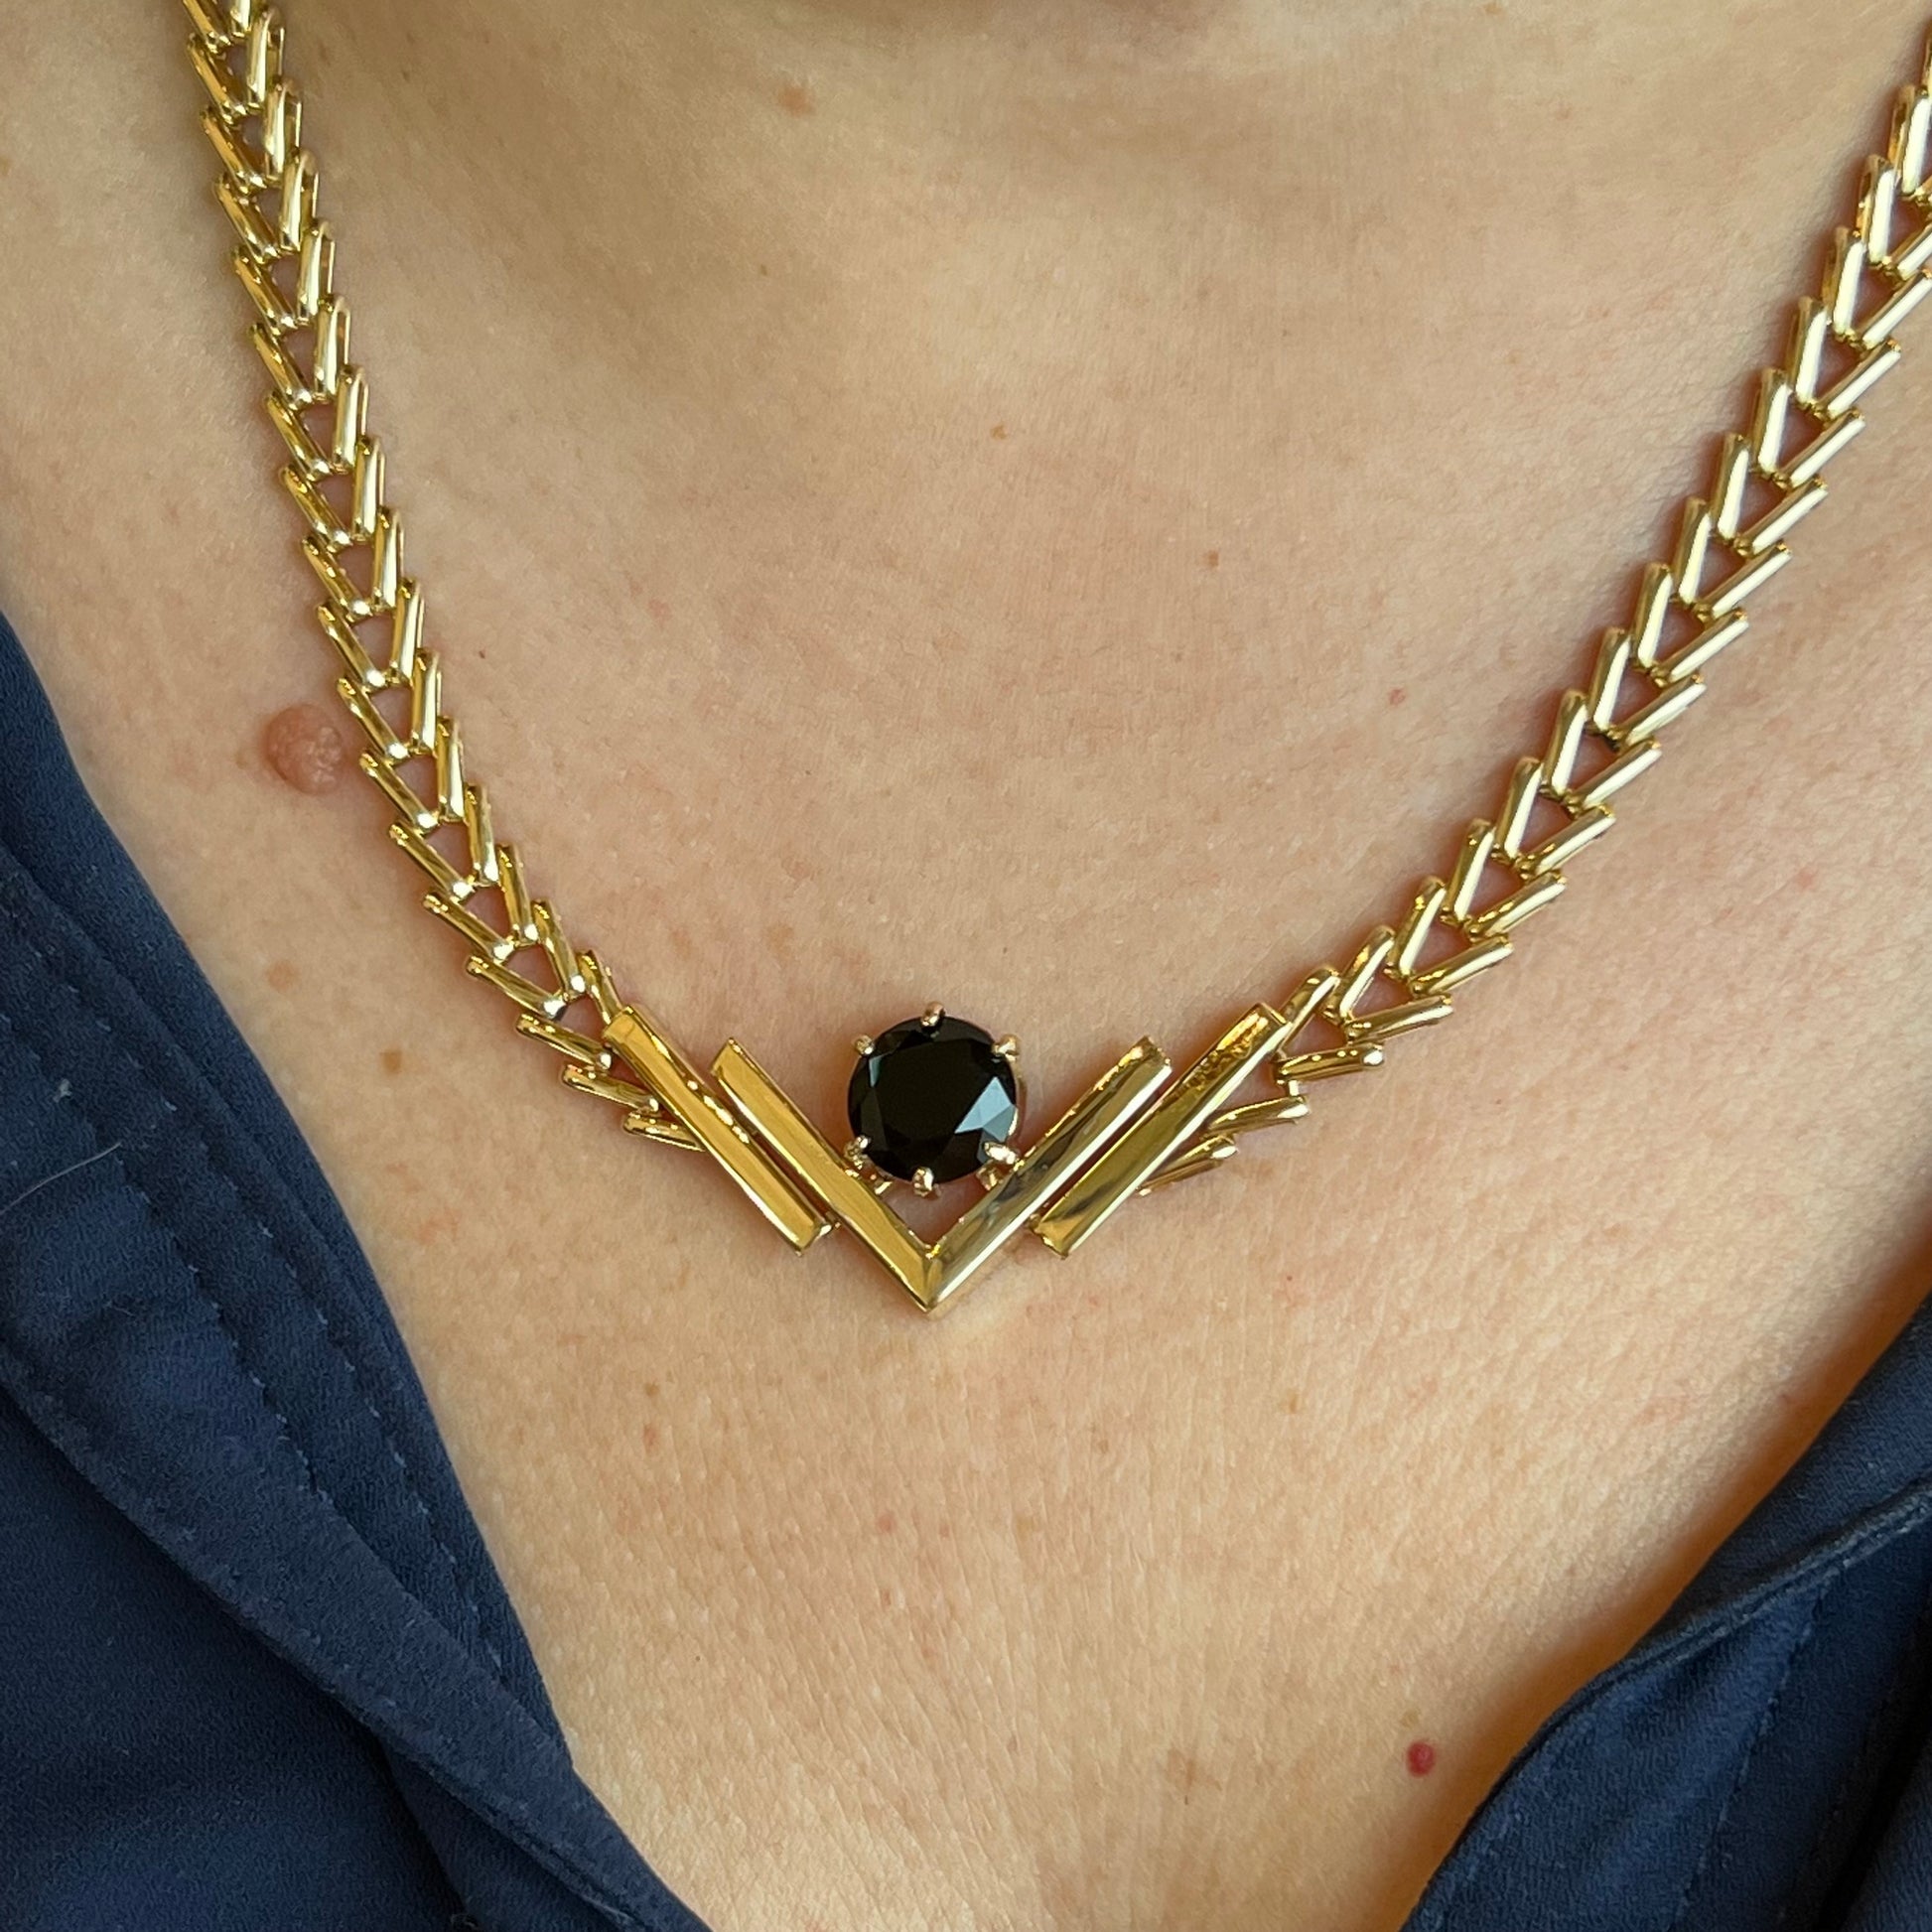 Modern Black Onyx Collar Necklace in 14k Yellow Gold